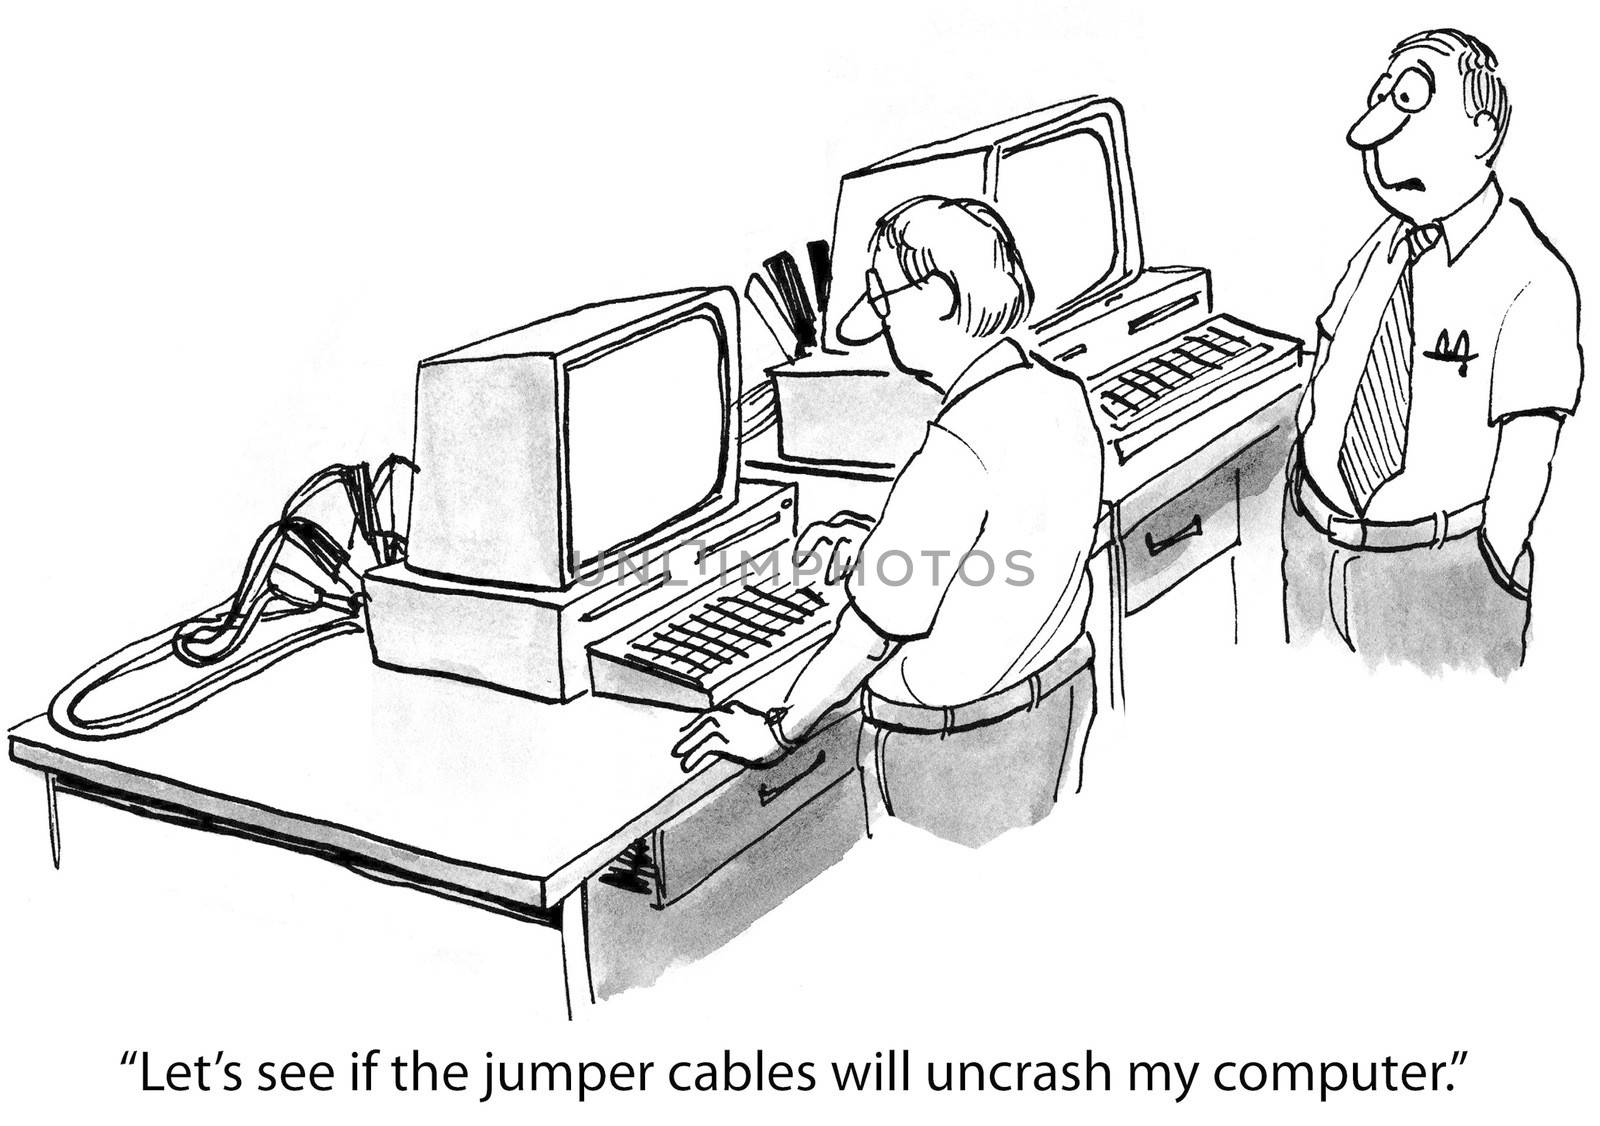 "Let's see if the jumper cables will uncrash my computer."